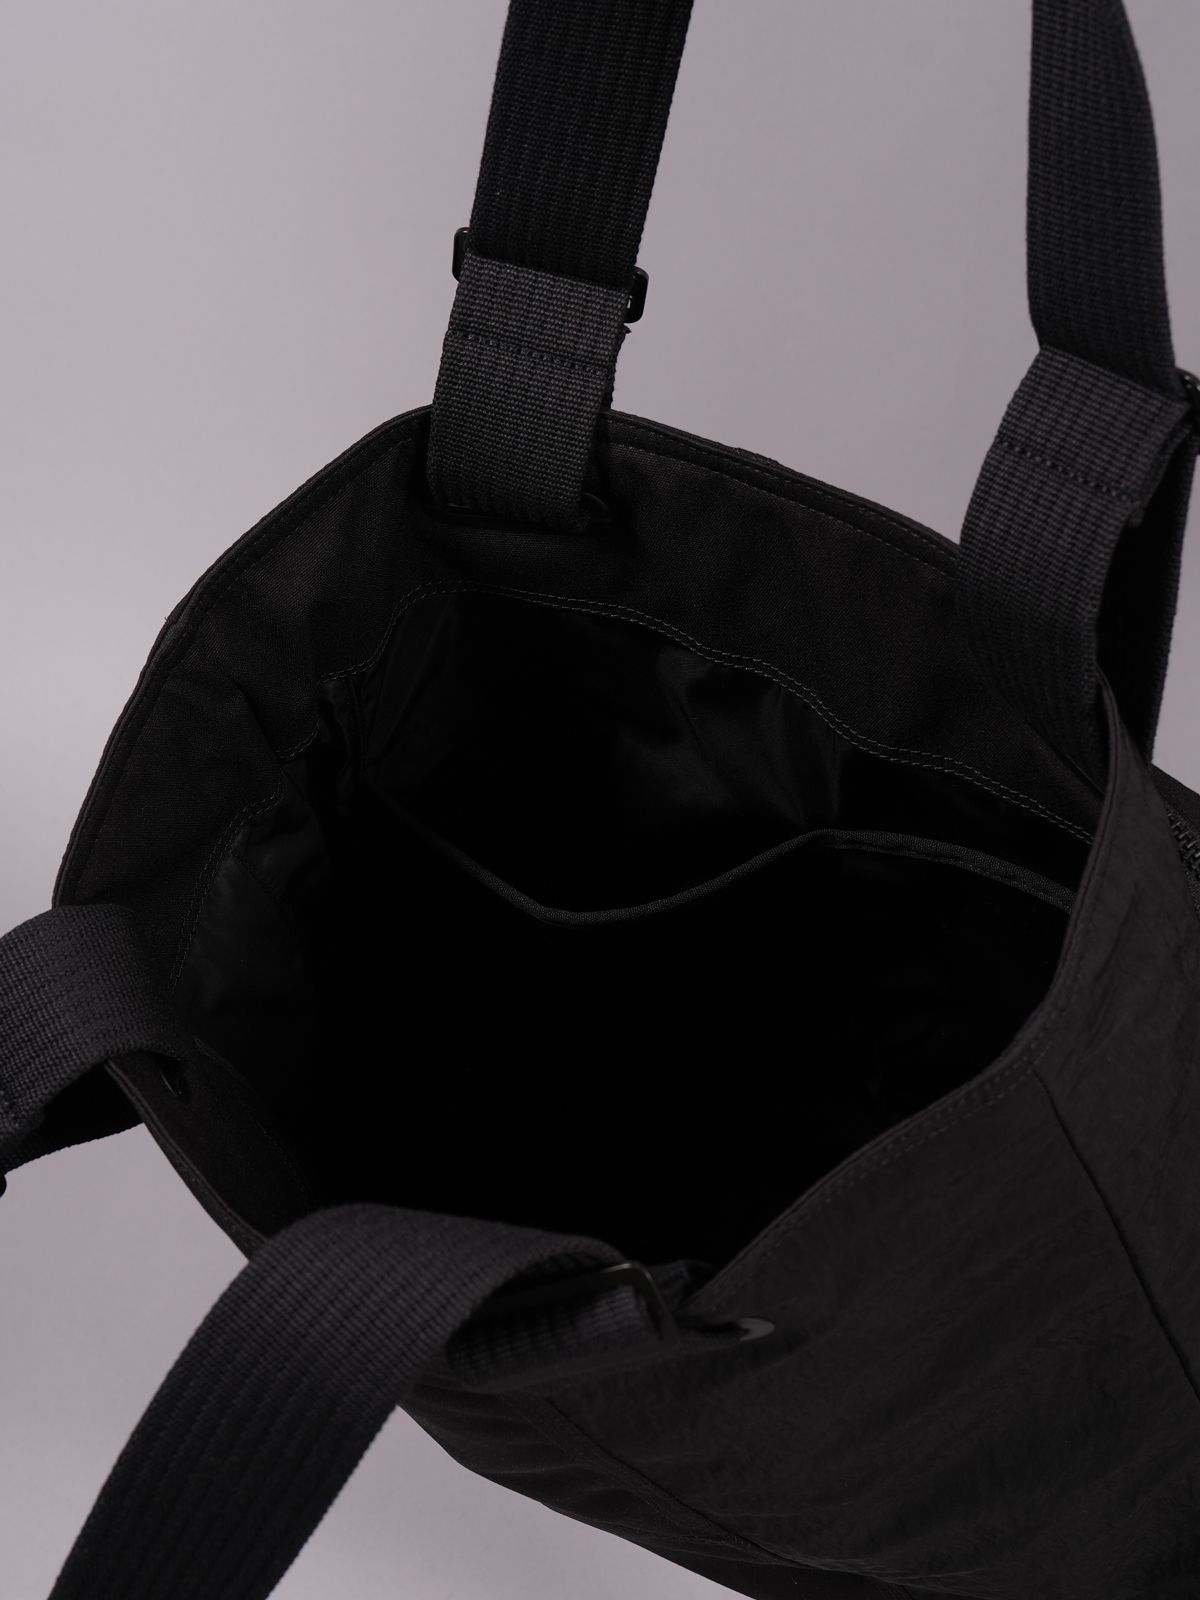 Y-3 - 【ラスト1点】 Y-3 CLASSIC TOTE / ワイスリー クラシックトート